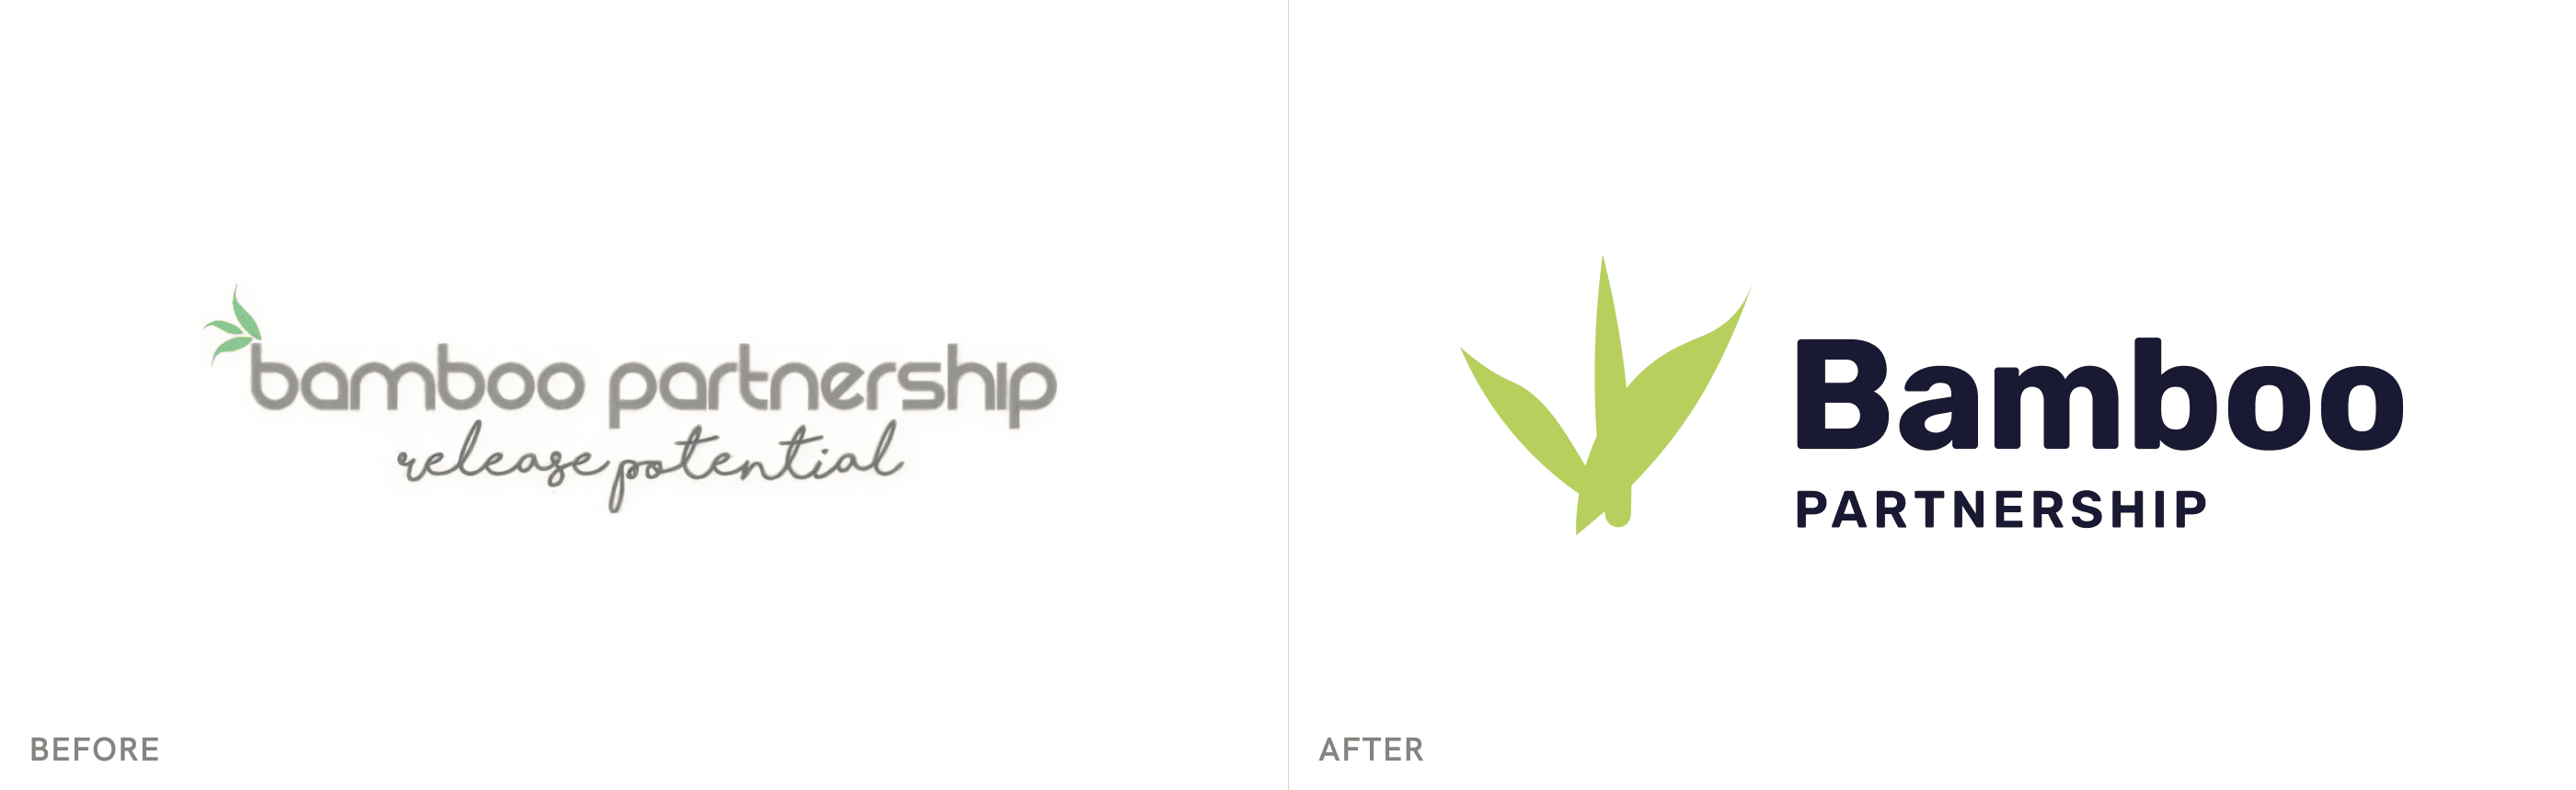 Bamboo Partnership Logo Before And After